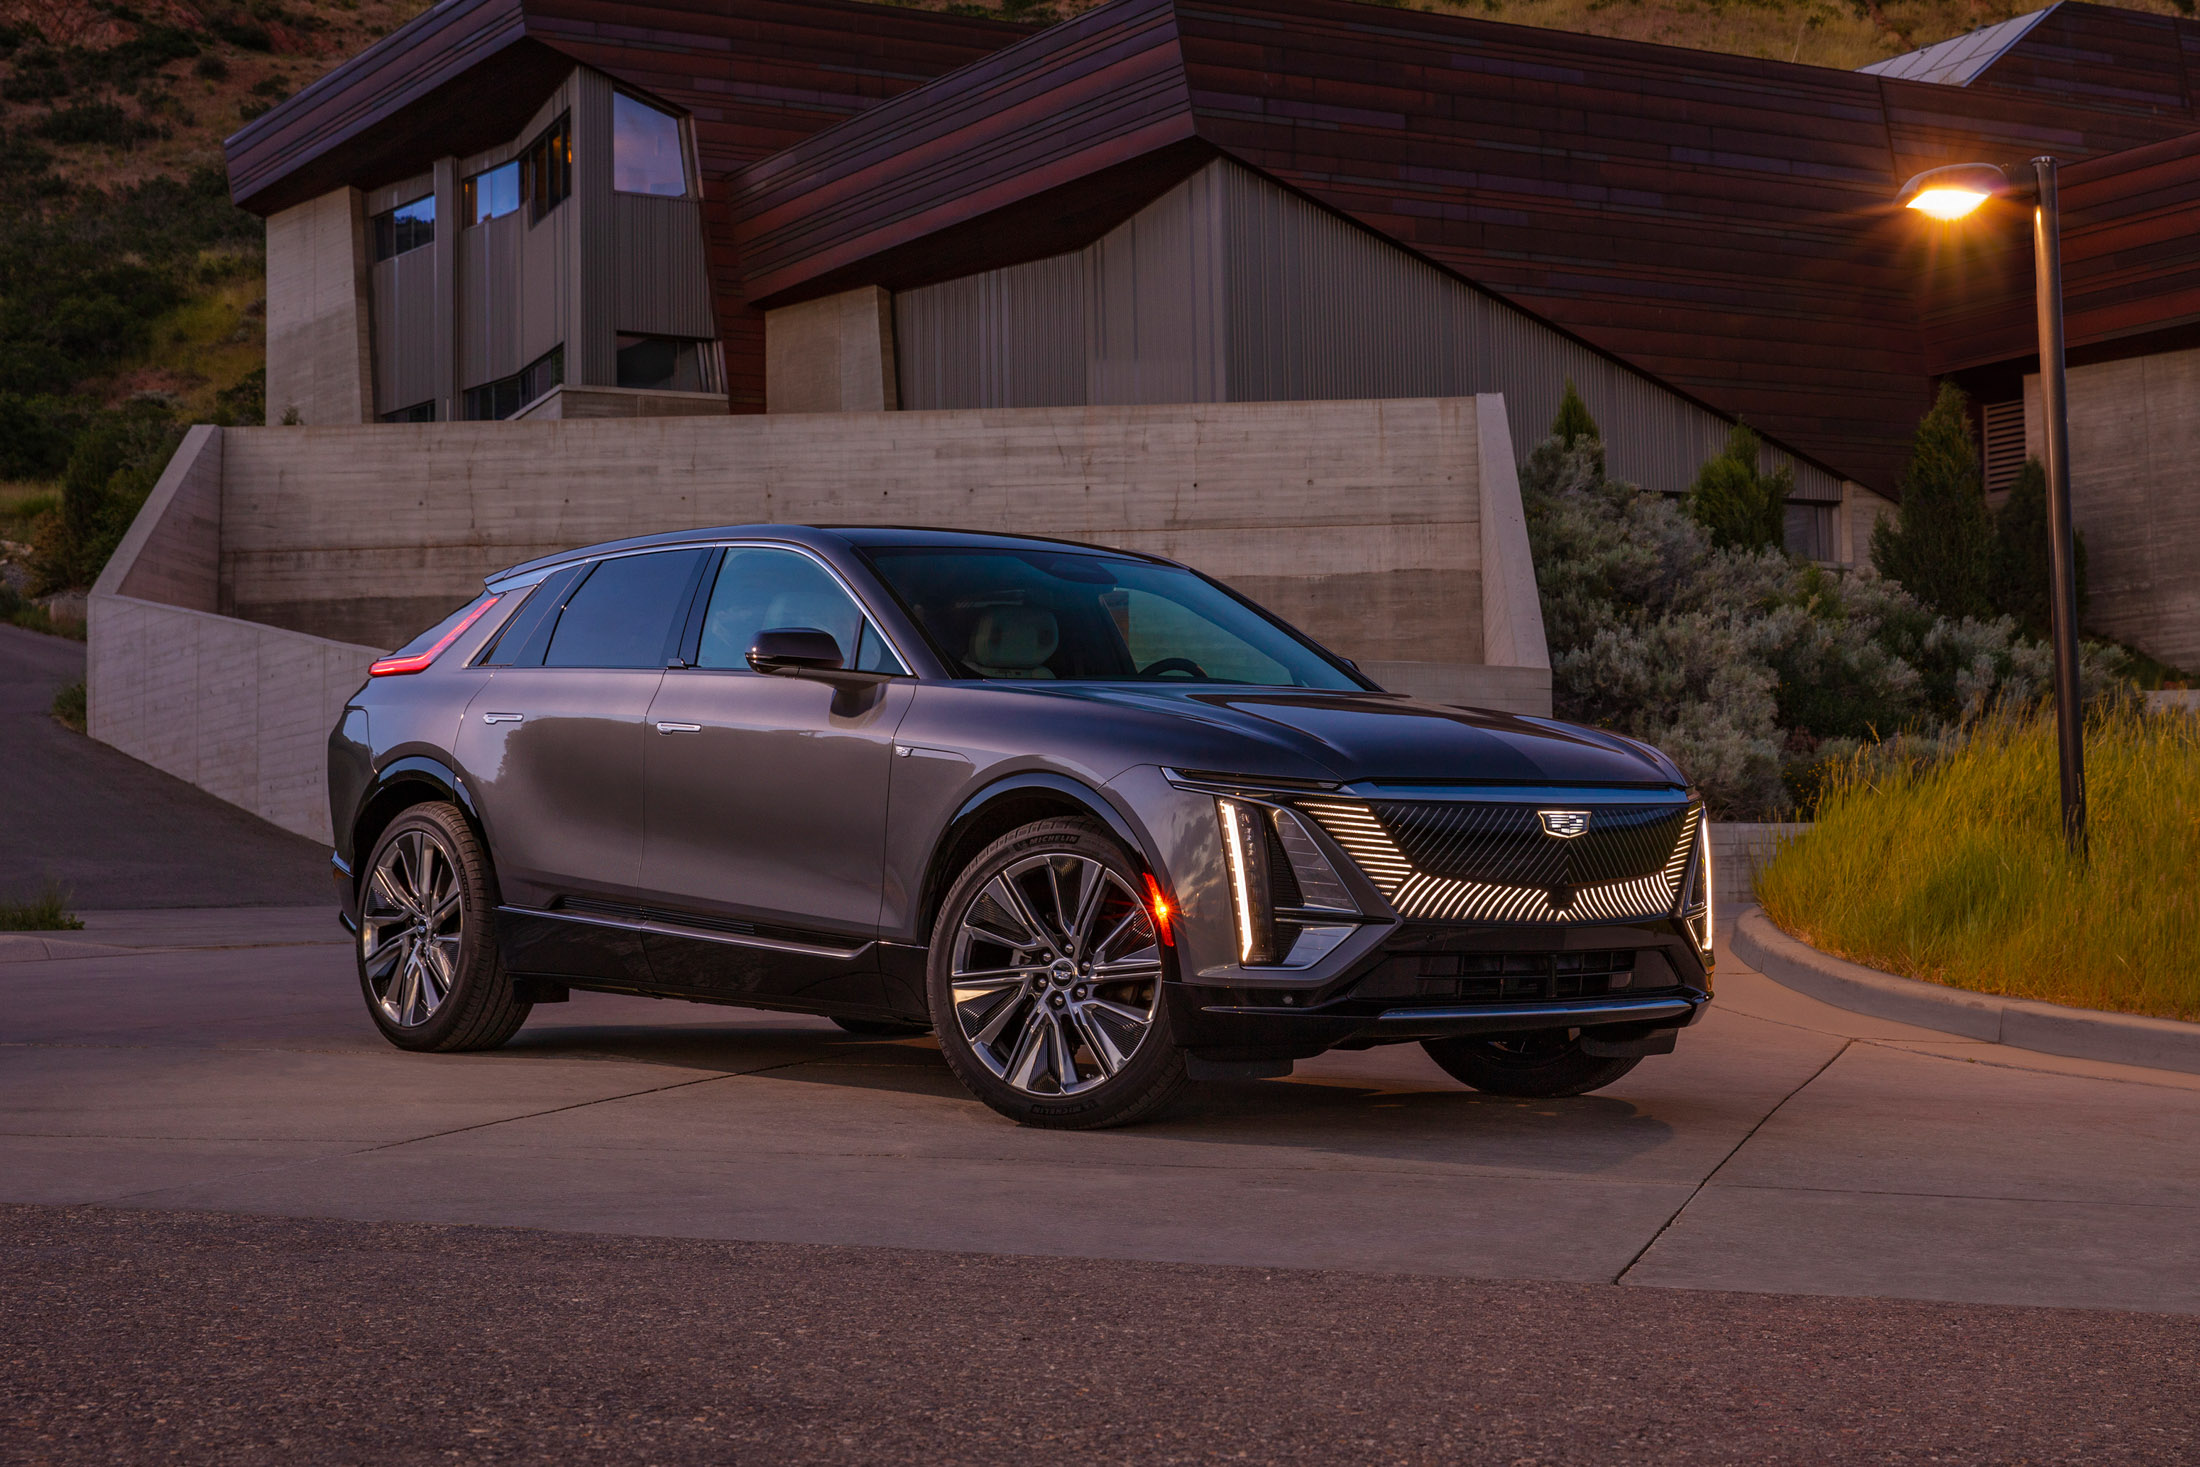 Cadillac Lyriq Review An Electric SUV That's Not Worth Waiting For